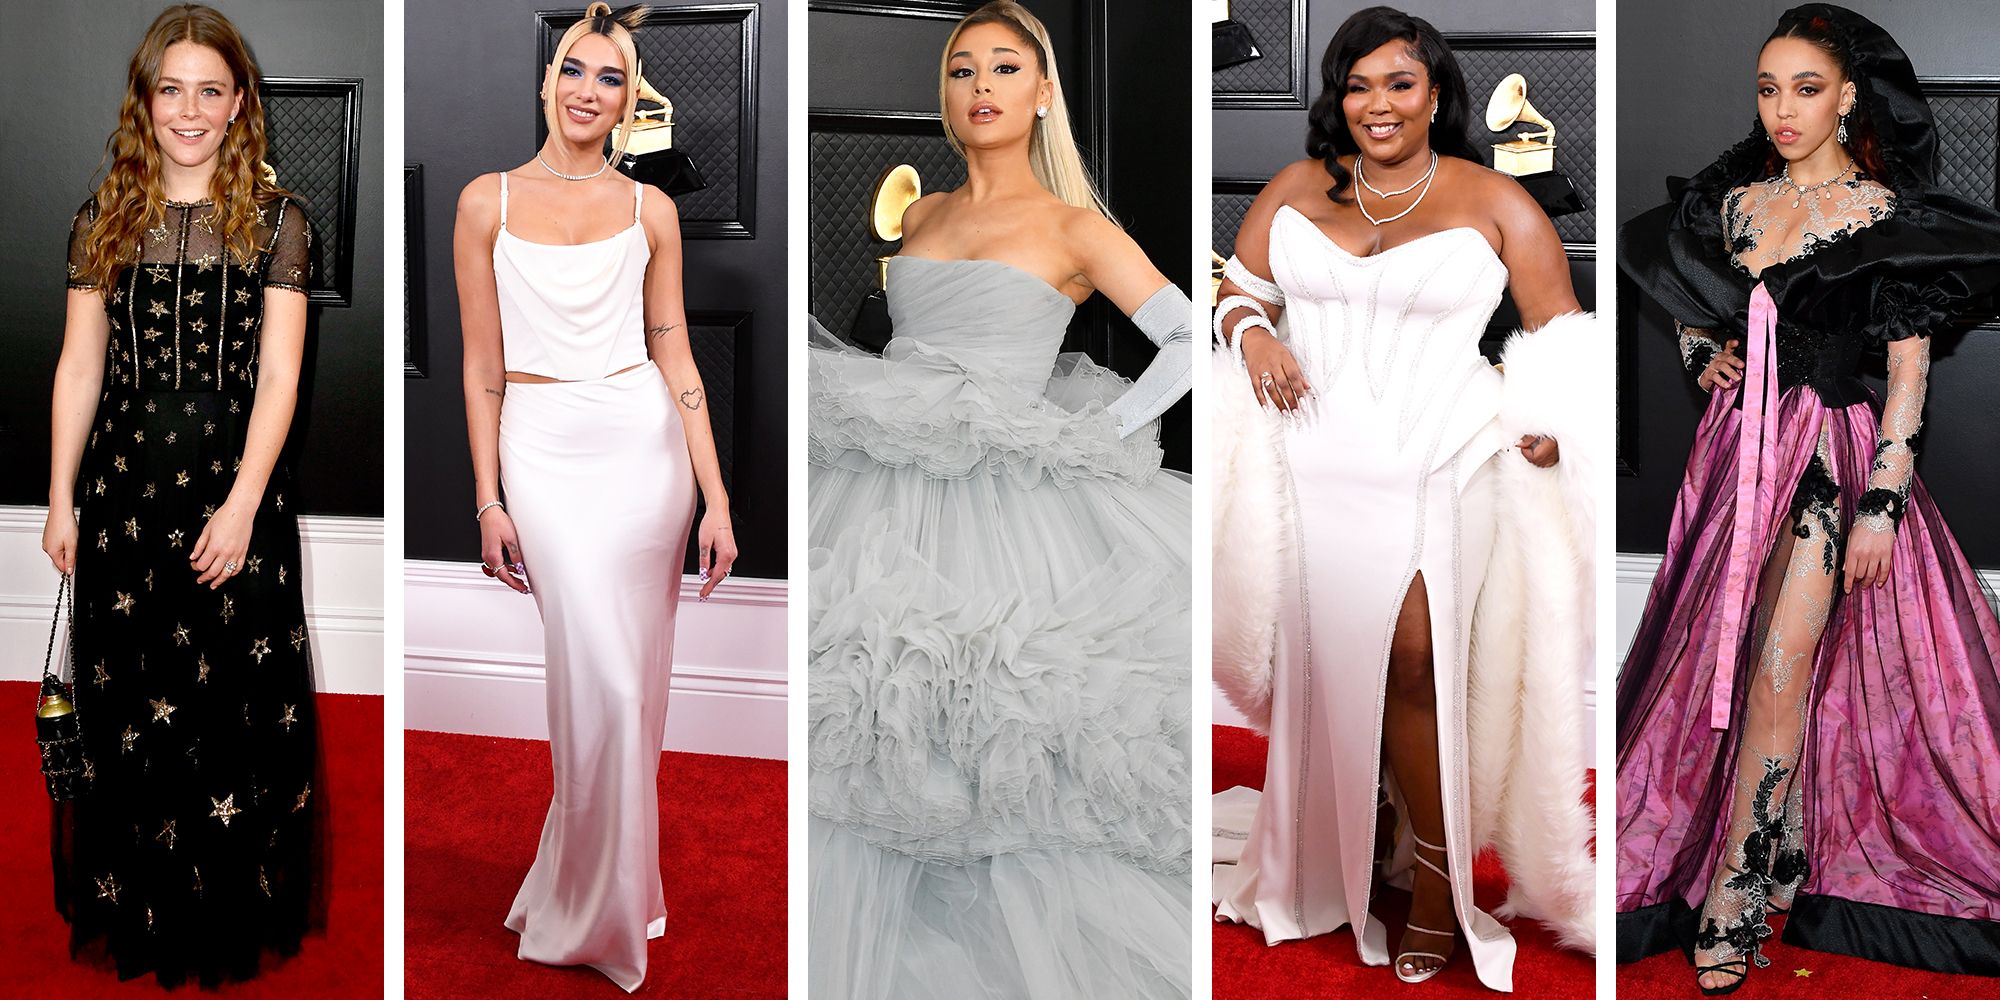 The Best Dressed Celebs at the 2020 Grammys - Lizzo, Ariana Grande